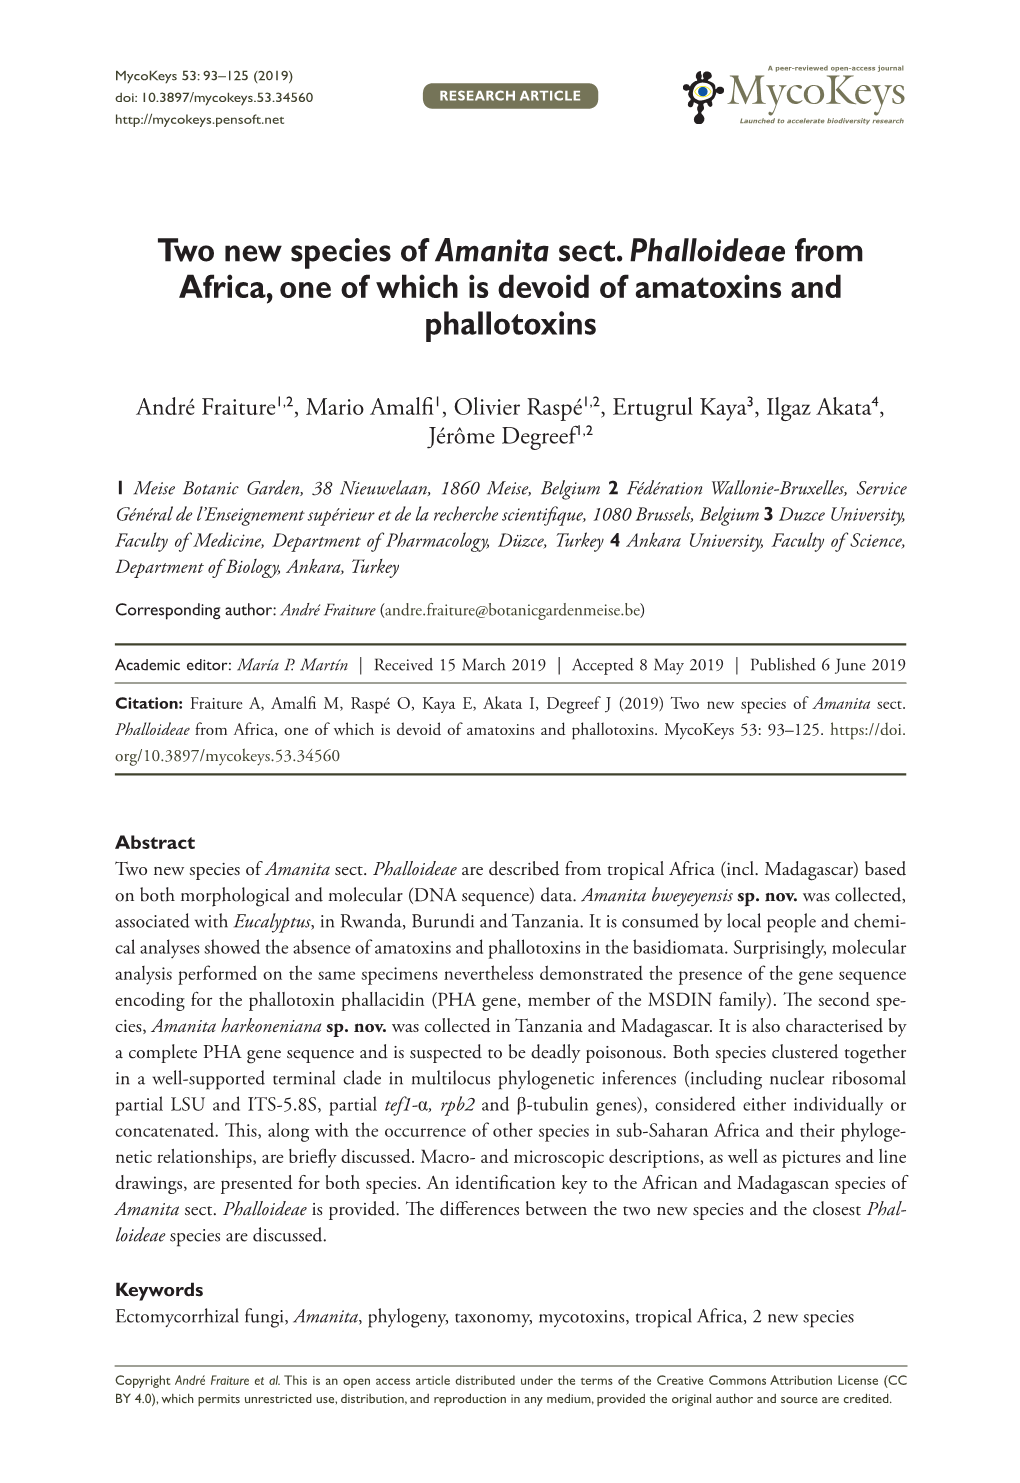 Two New Species of Amanita Sect. Phalloideae from Africa